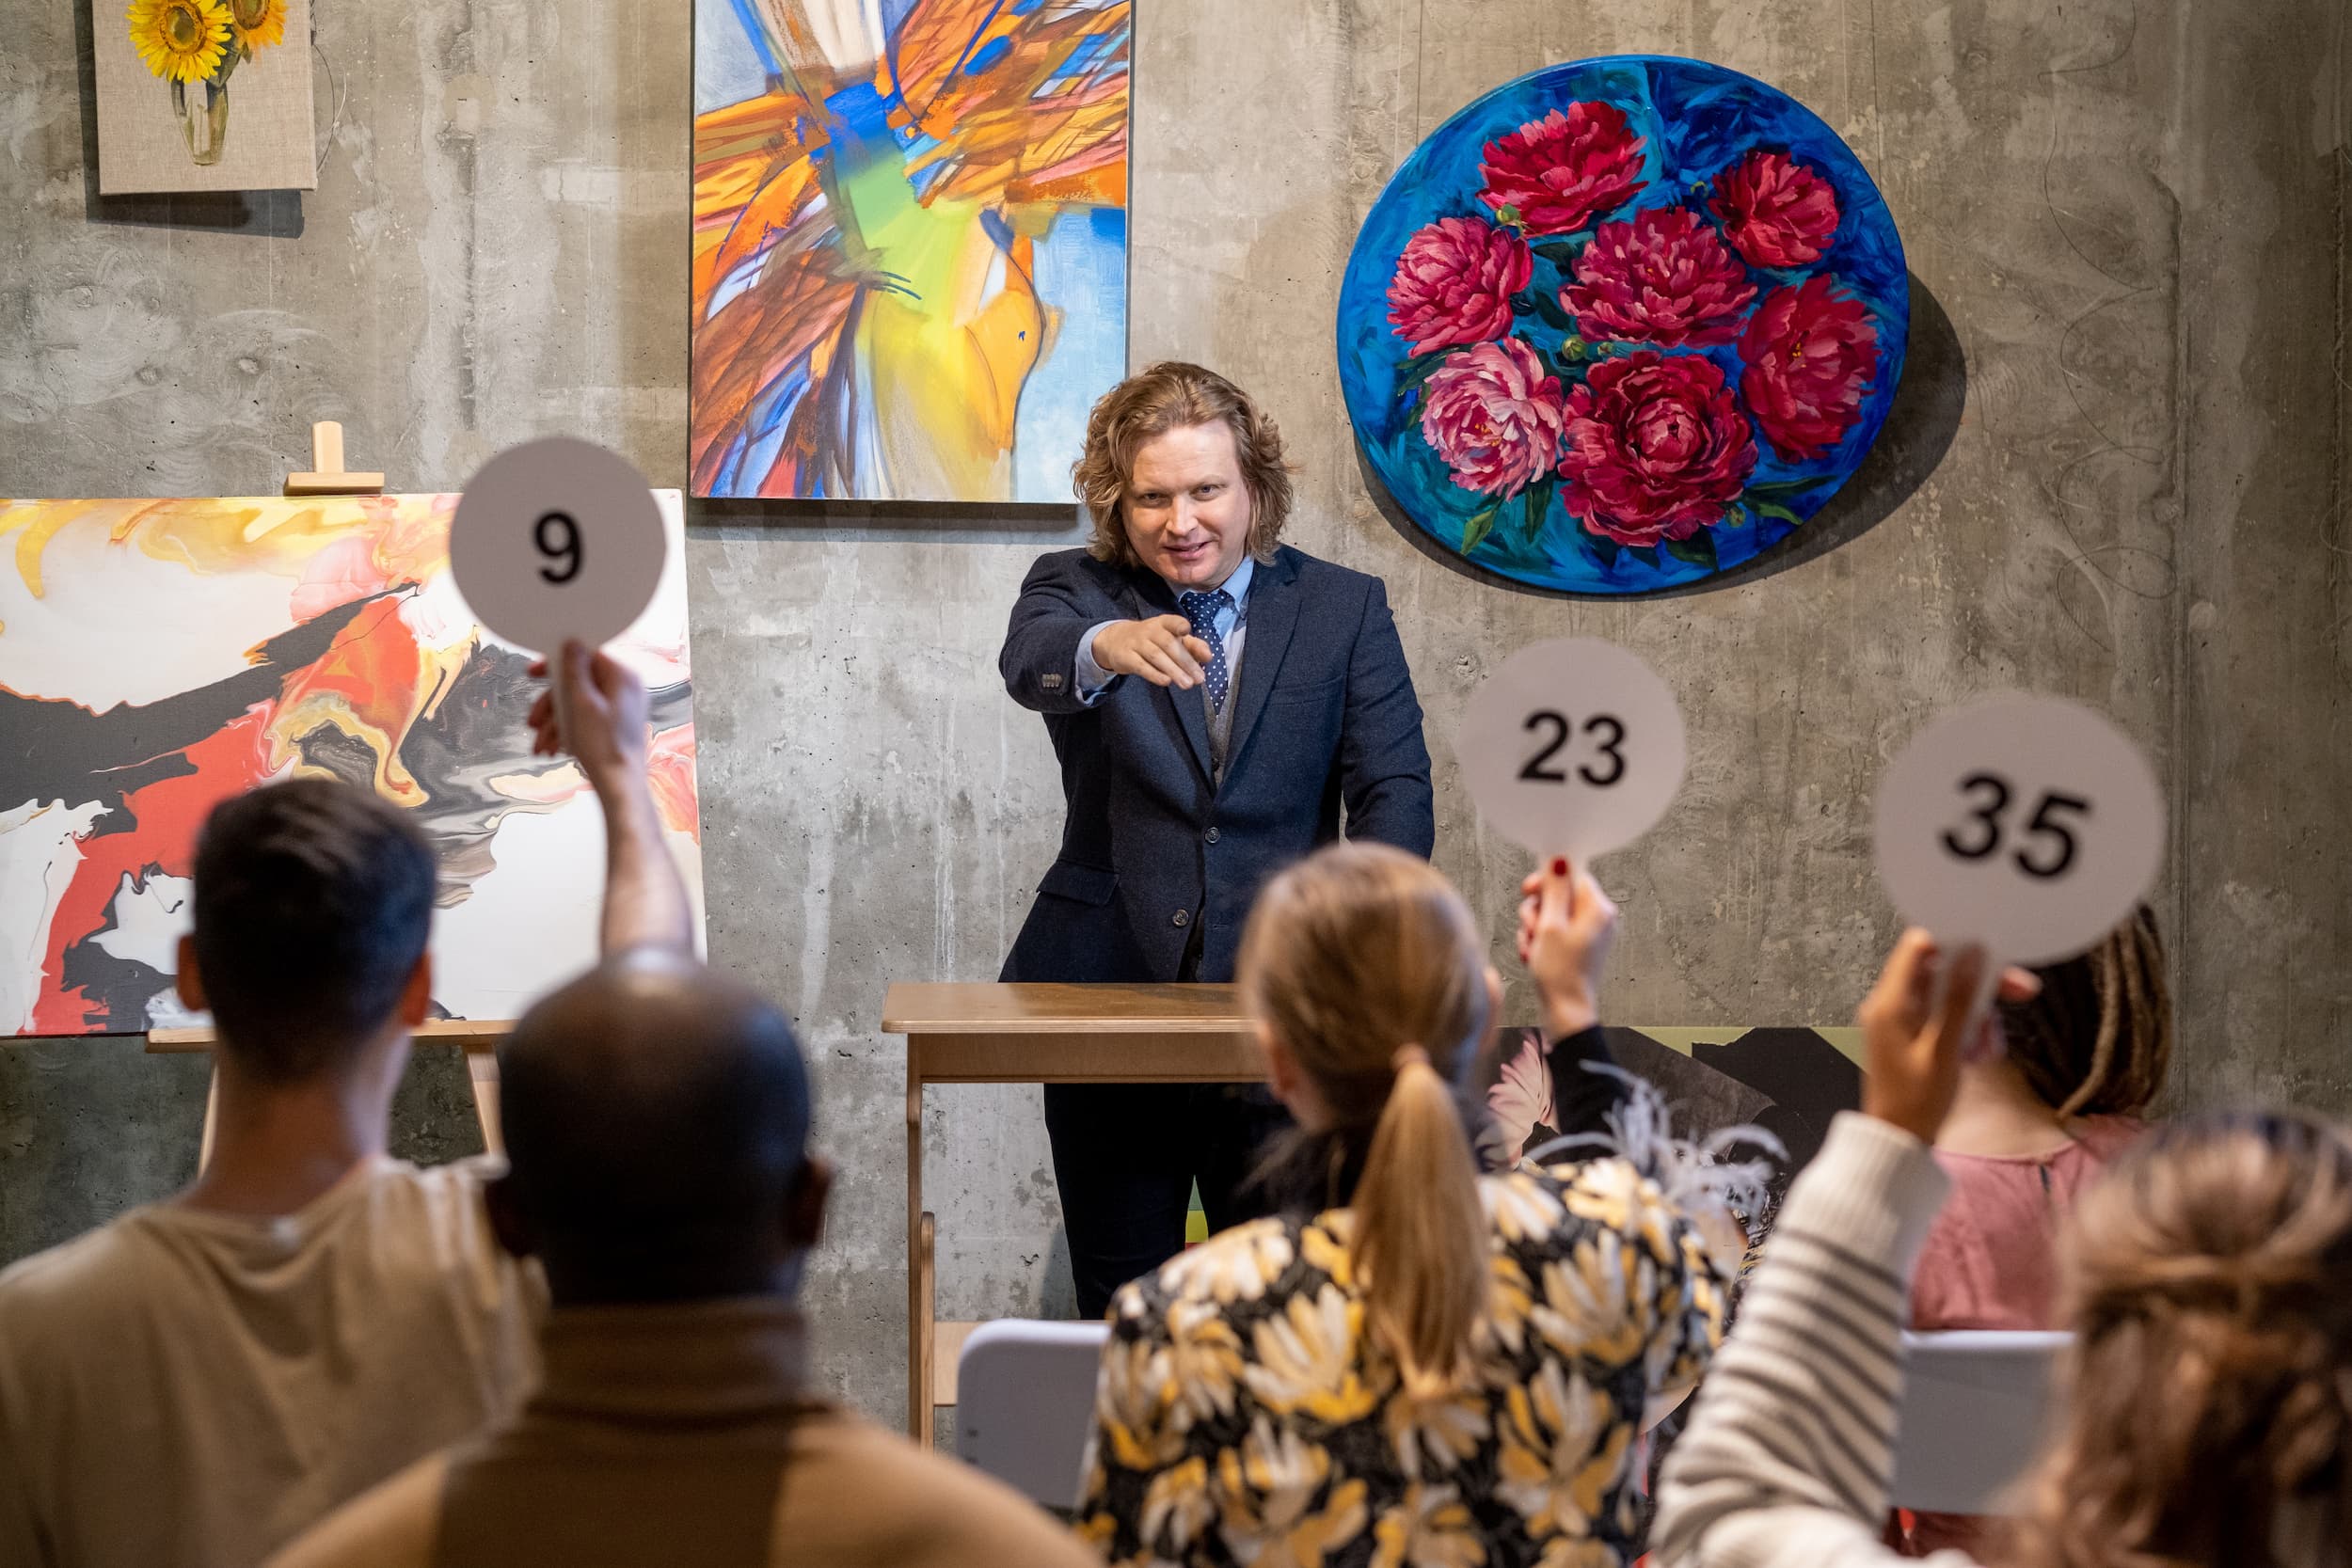 benefit auctioneer auctions off art at a live auction